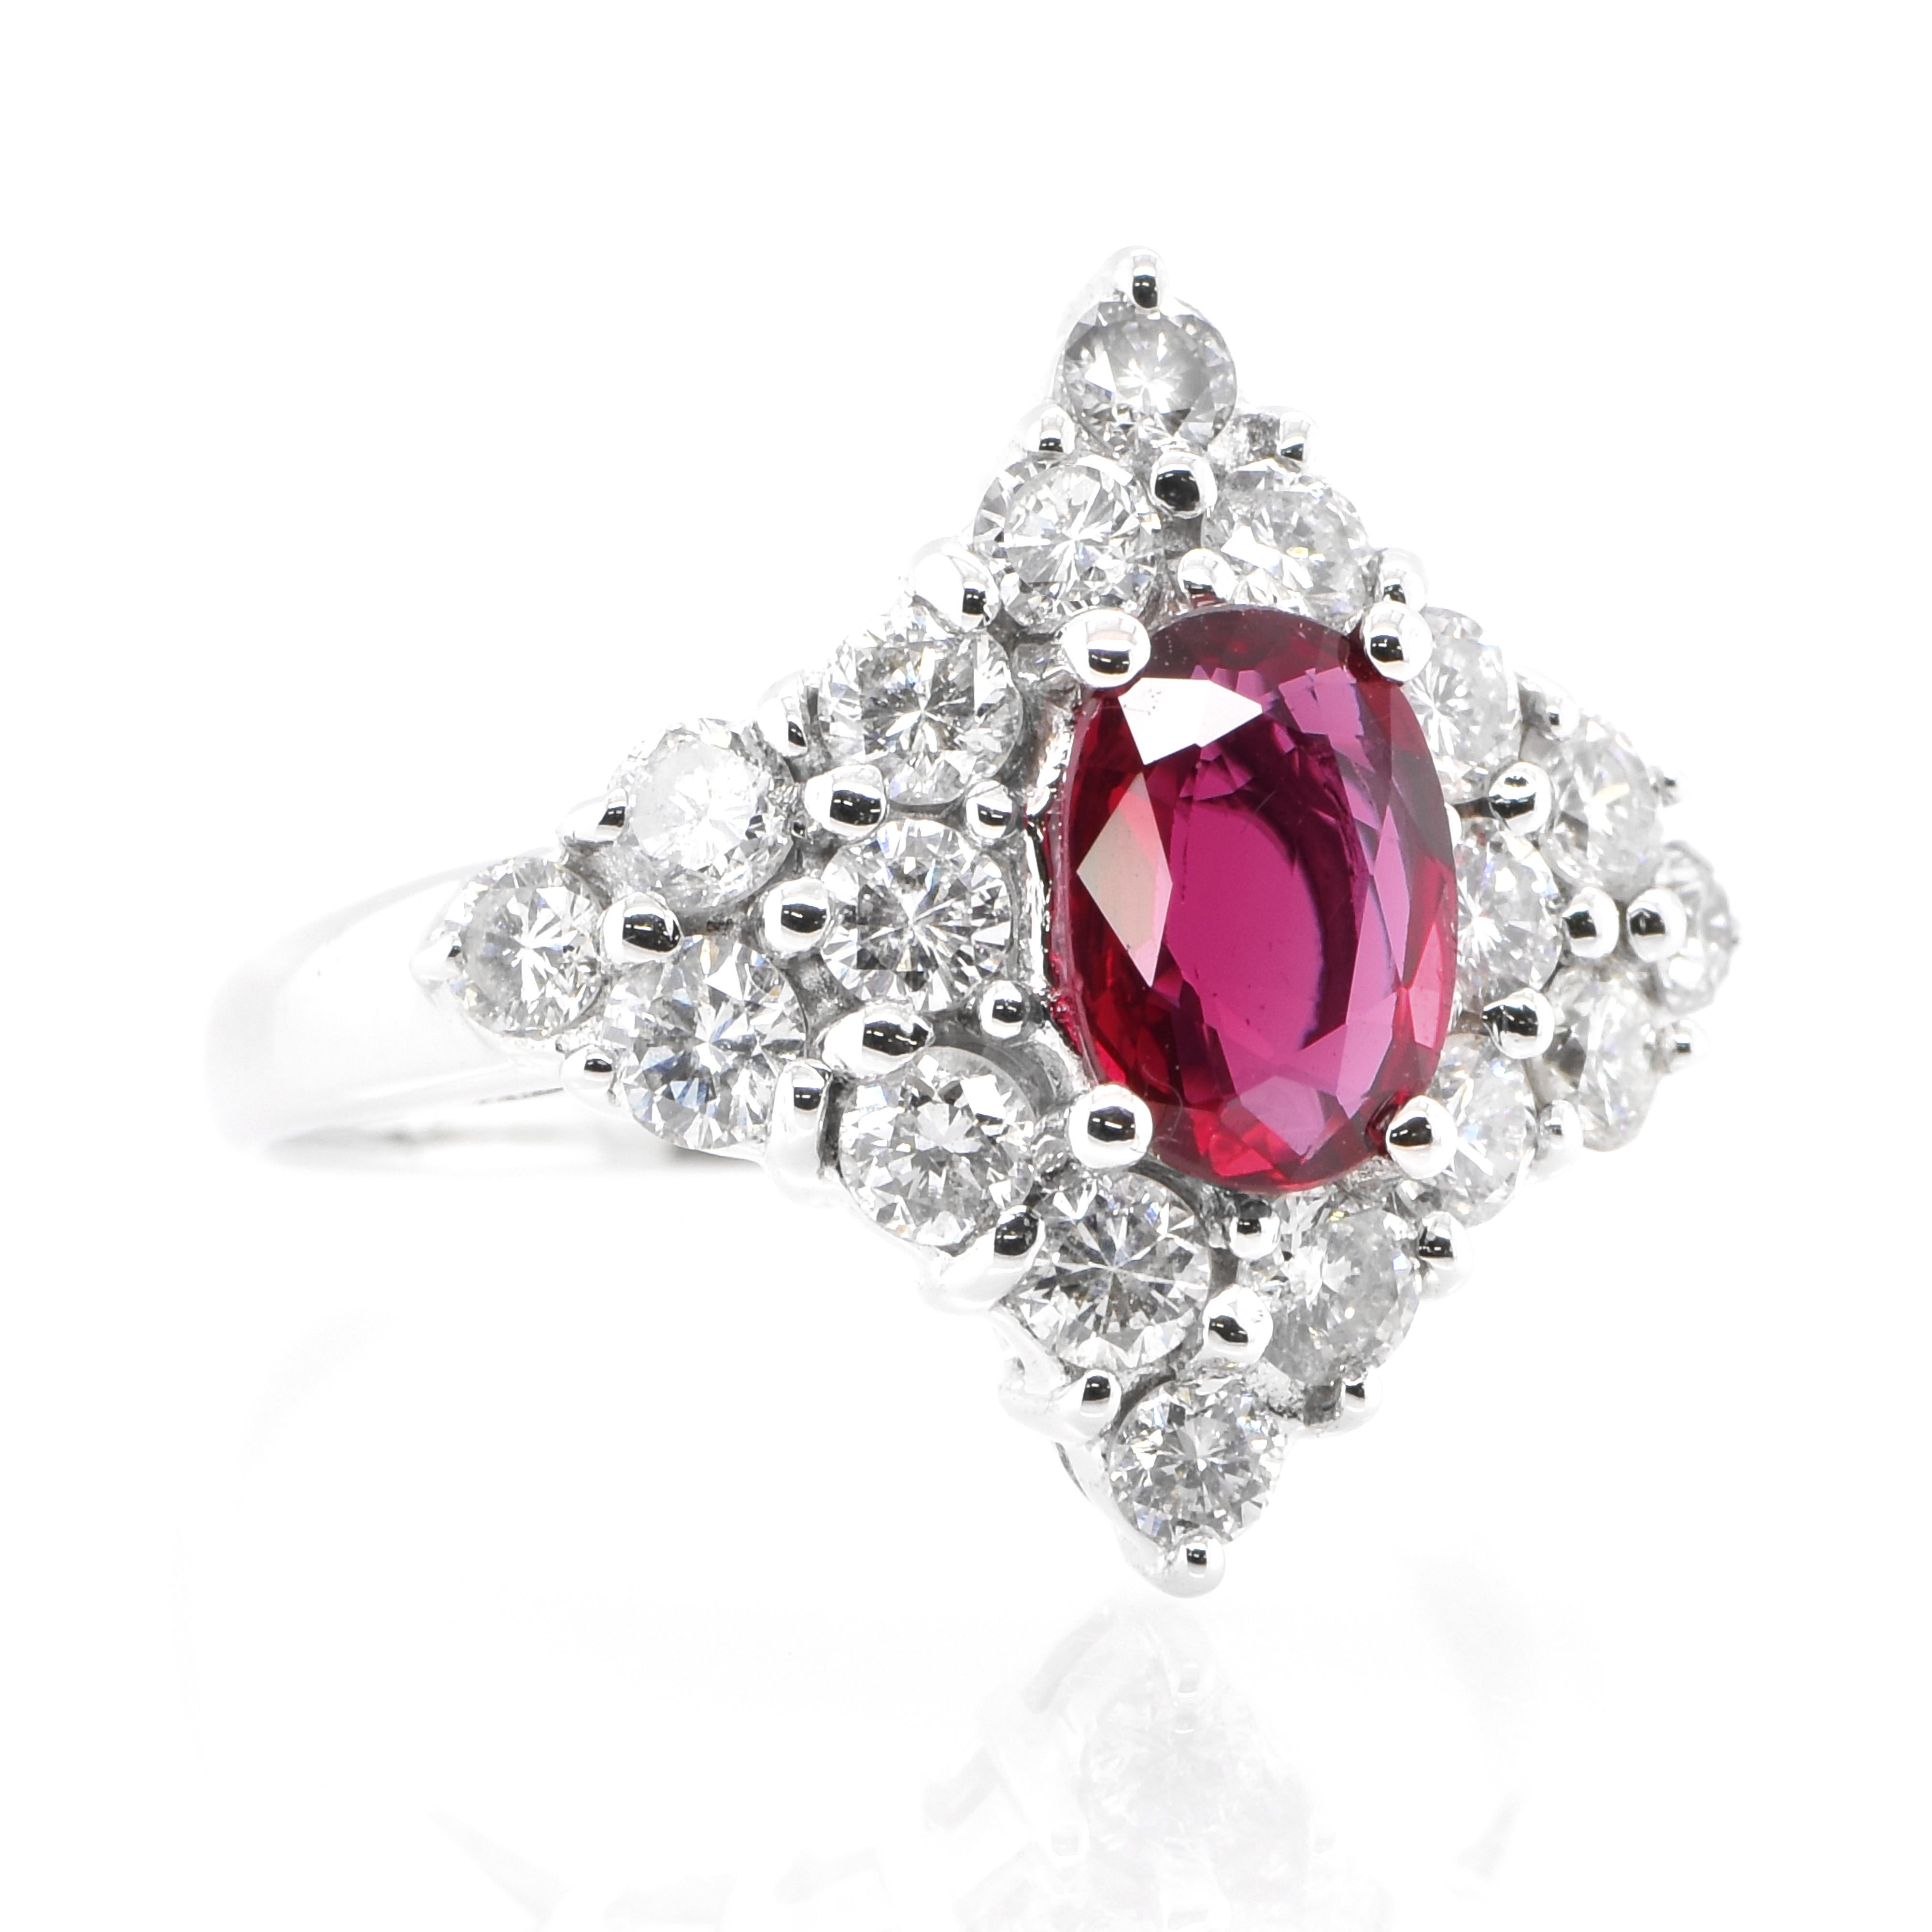 A beautiful ring set in 18 Karat Gold featuring a 1.01Carat Natural Ruby and 1.20 Carat Diamonds. Rubies are referred to as 